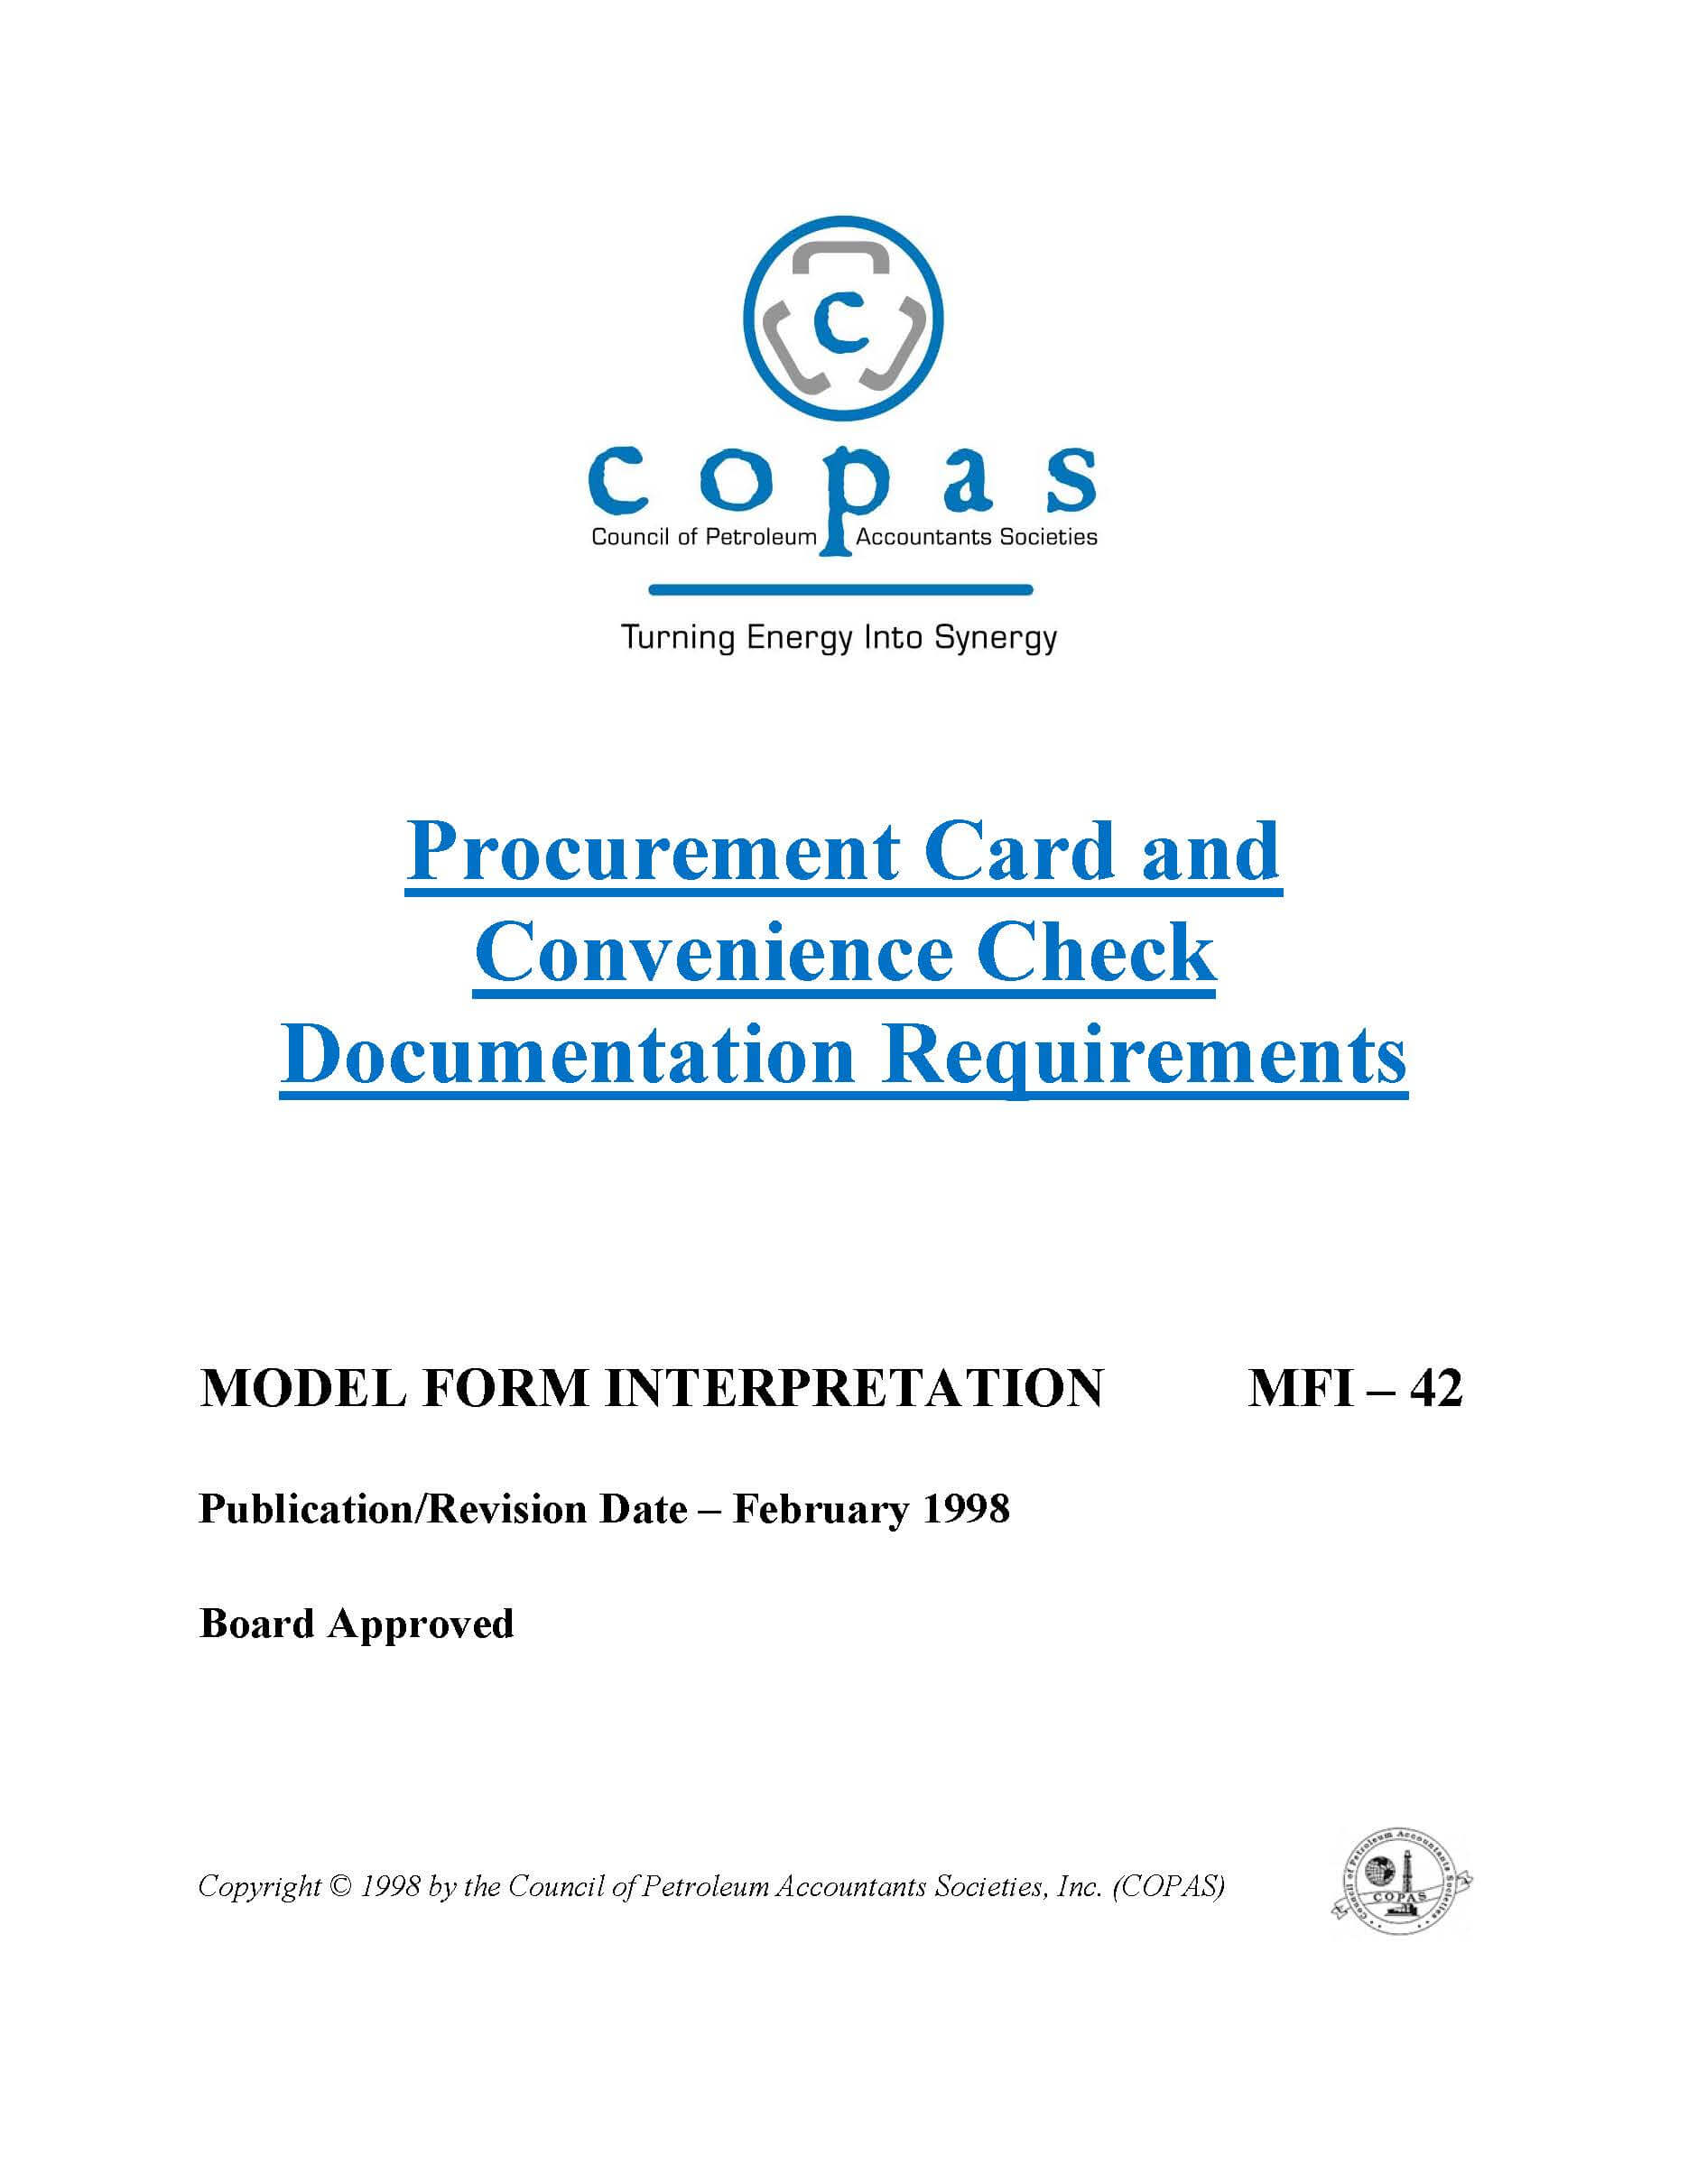 MFI-42 Procurement Card and Convenience Check Documentation Requirements